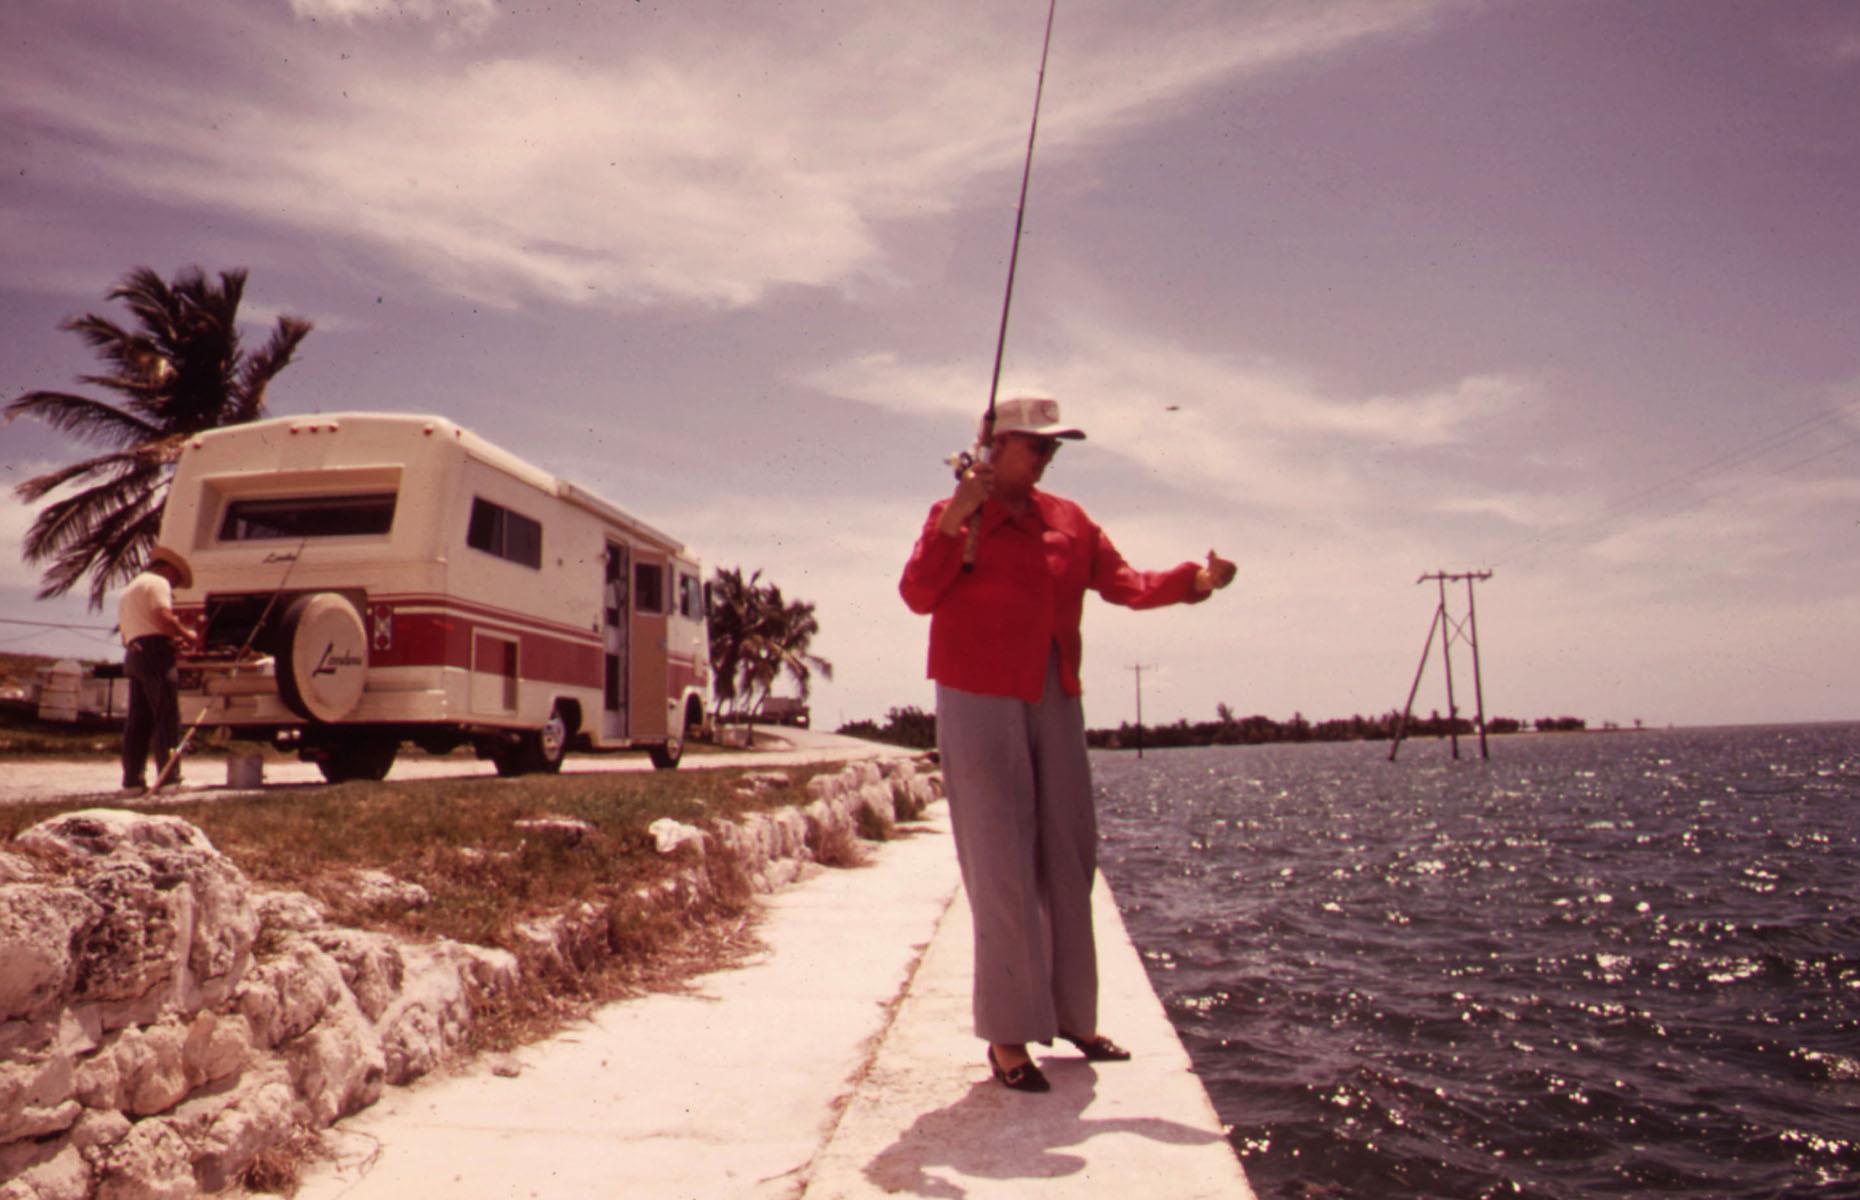 While newfangled motorhomes and ever-improving highways opened up the whole of America to travelers, the Sunshine State remained an enduring favorite with vacationers. Here, a retired couple from California stop off in Florida's Spanish Harbor Key for a spot of fishing. Their RV glints in the sunshine at the water's edge.